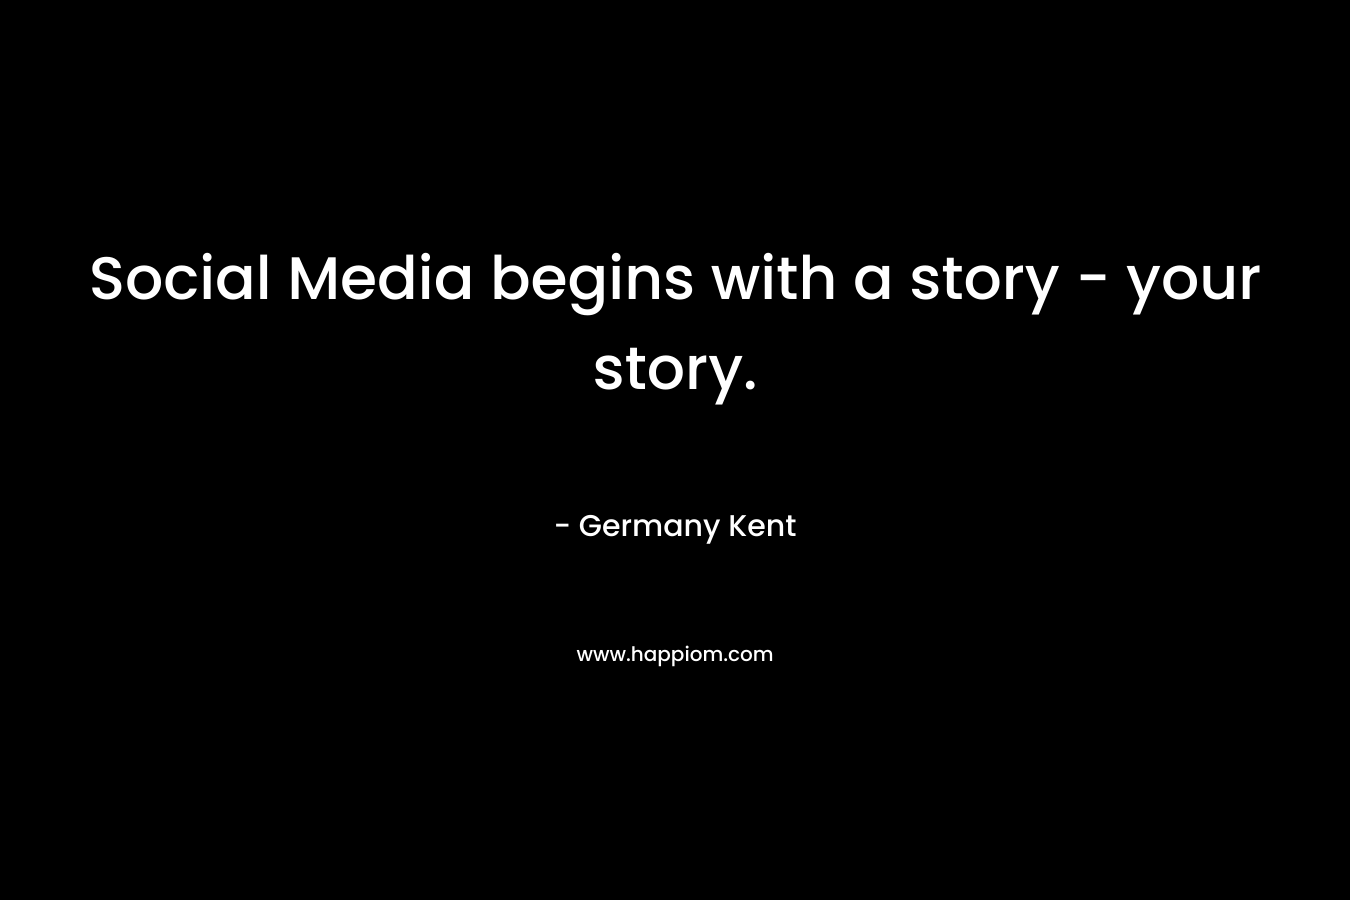 Social Media begins with a story - your story.